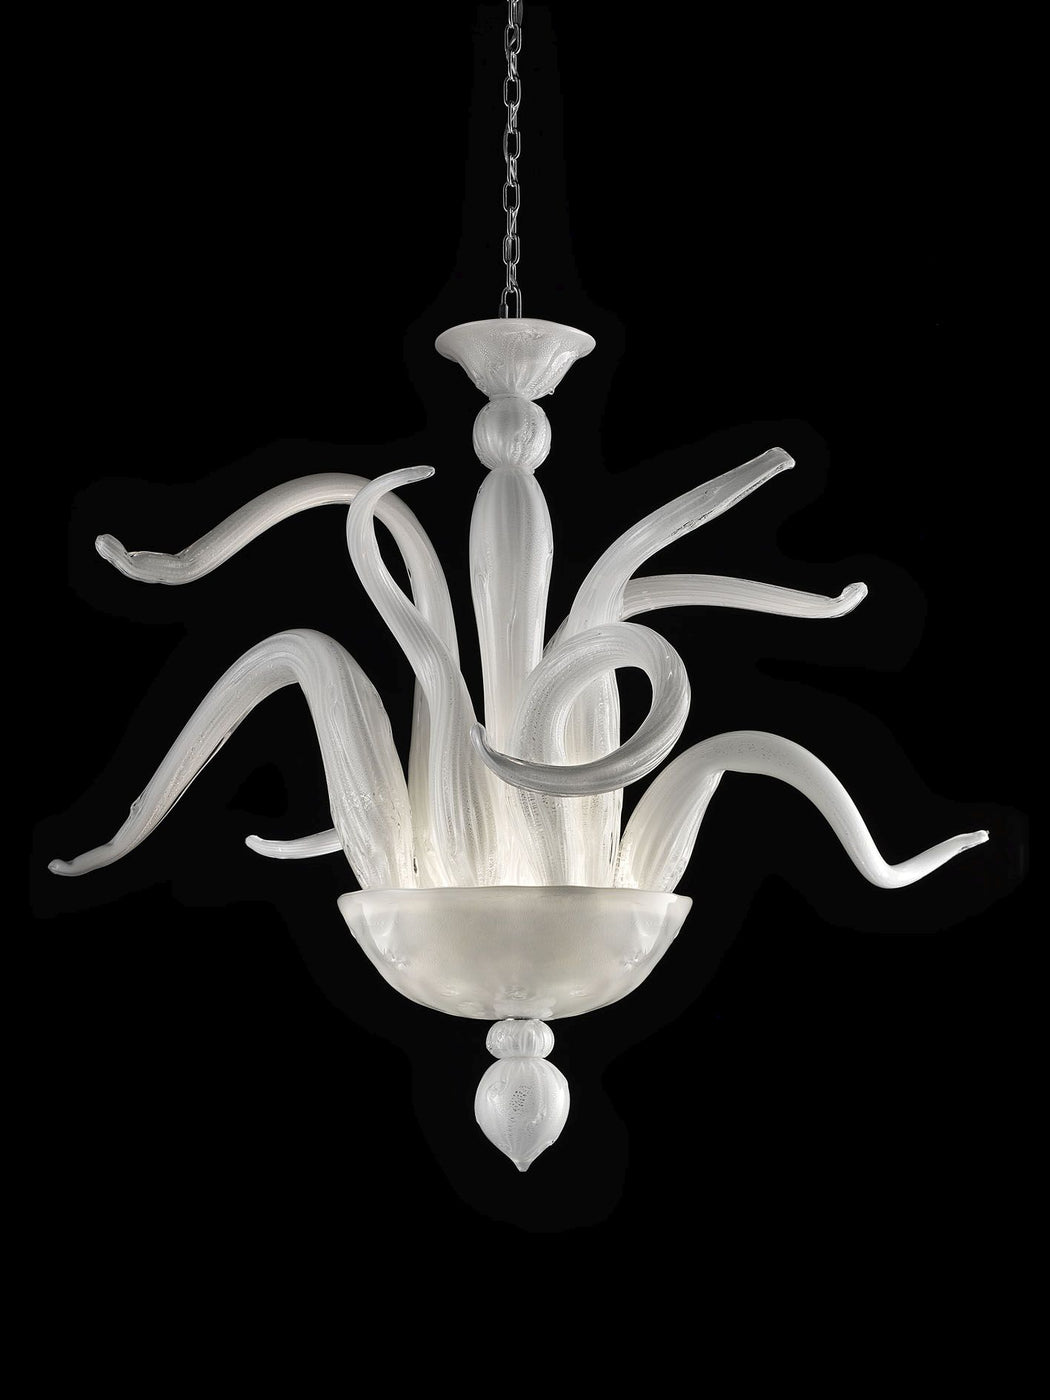 Timeless white  Venetian art glass pendant light with gold or silver-infused glass